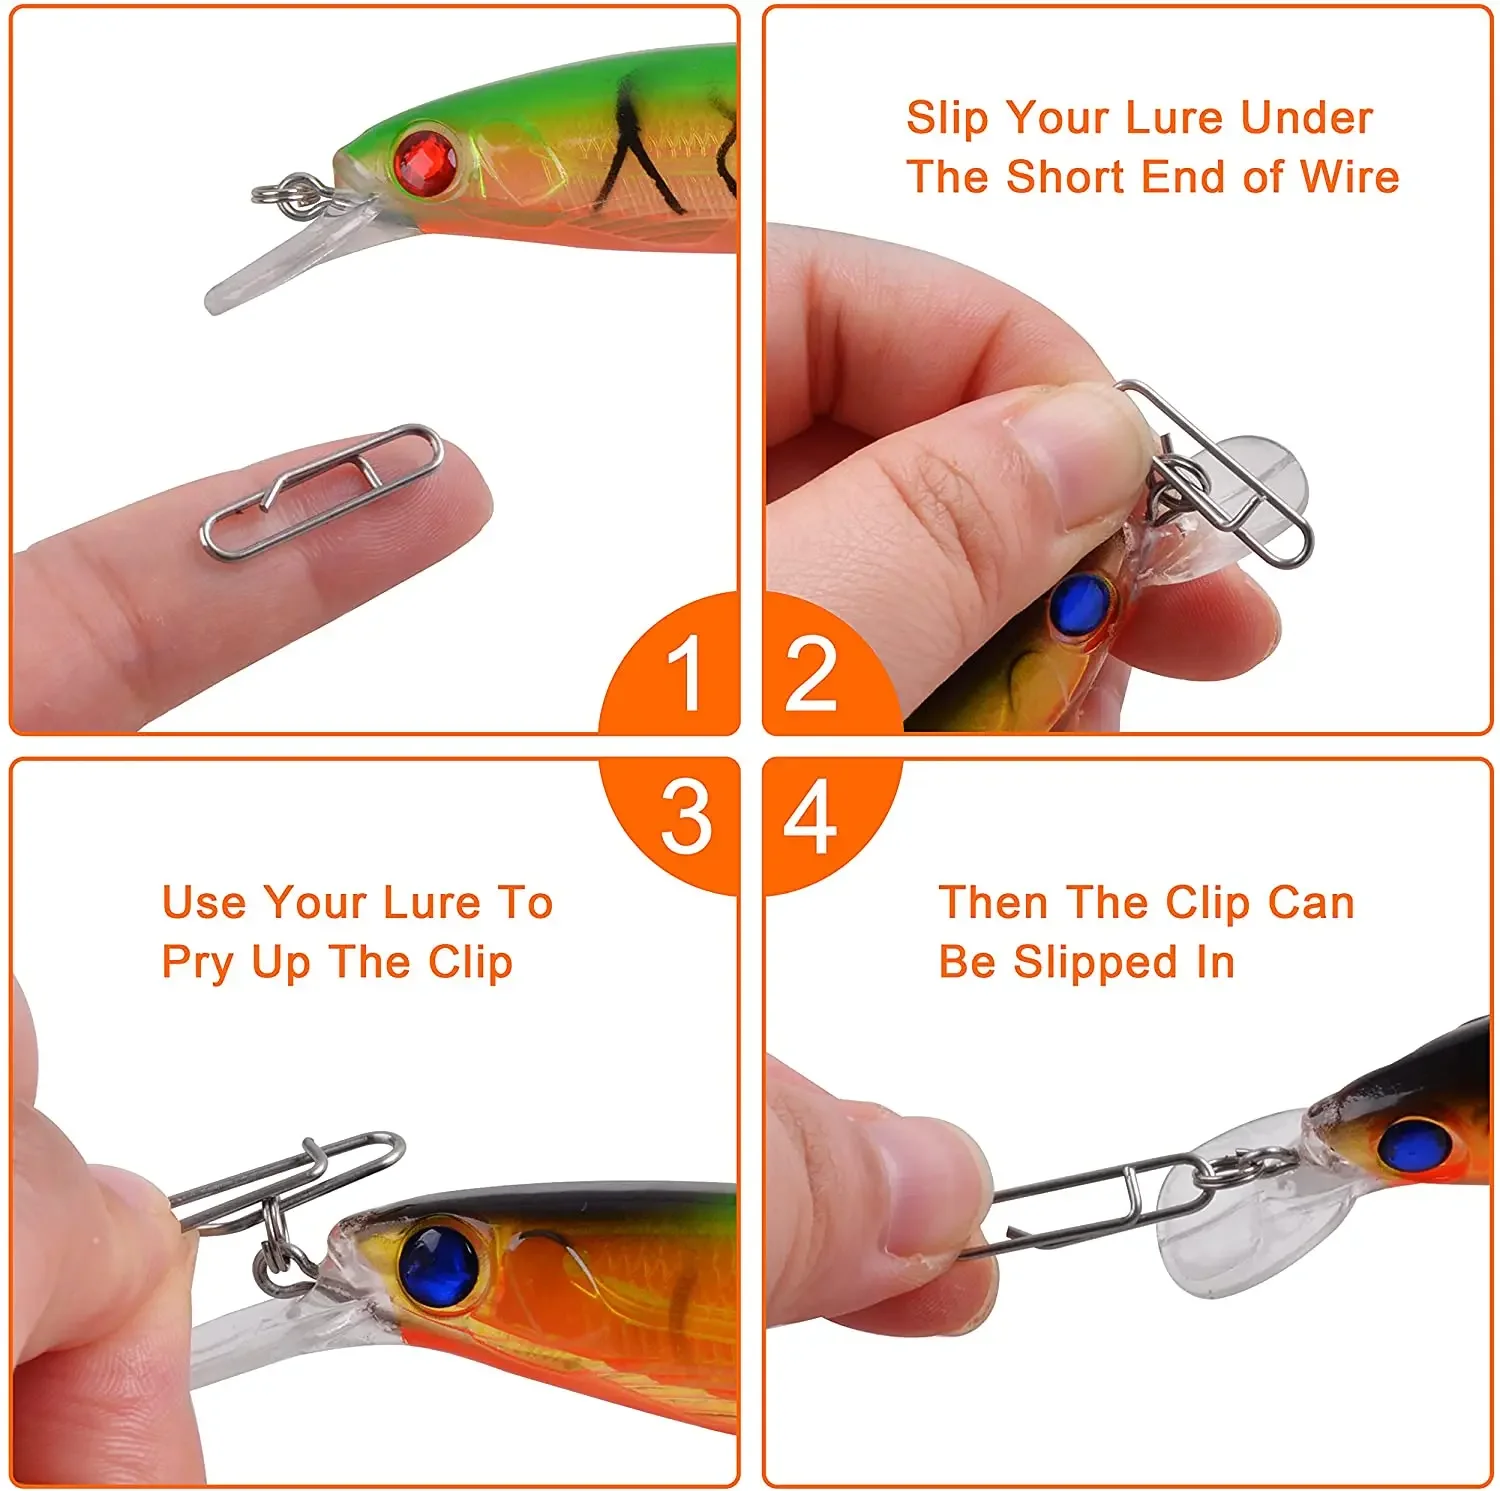 https://ae01.alicdn.com/kf/Sd7af309bcbf14b38b1e824e64113132fG/DNDYUJU-100pcs-Powerful-Stainless-Steel-Fast-Link-Clip-Snap-Fishing-Tackle-Quick-Change-Lead-Links-Clips.jpg